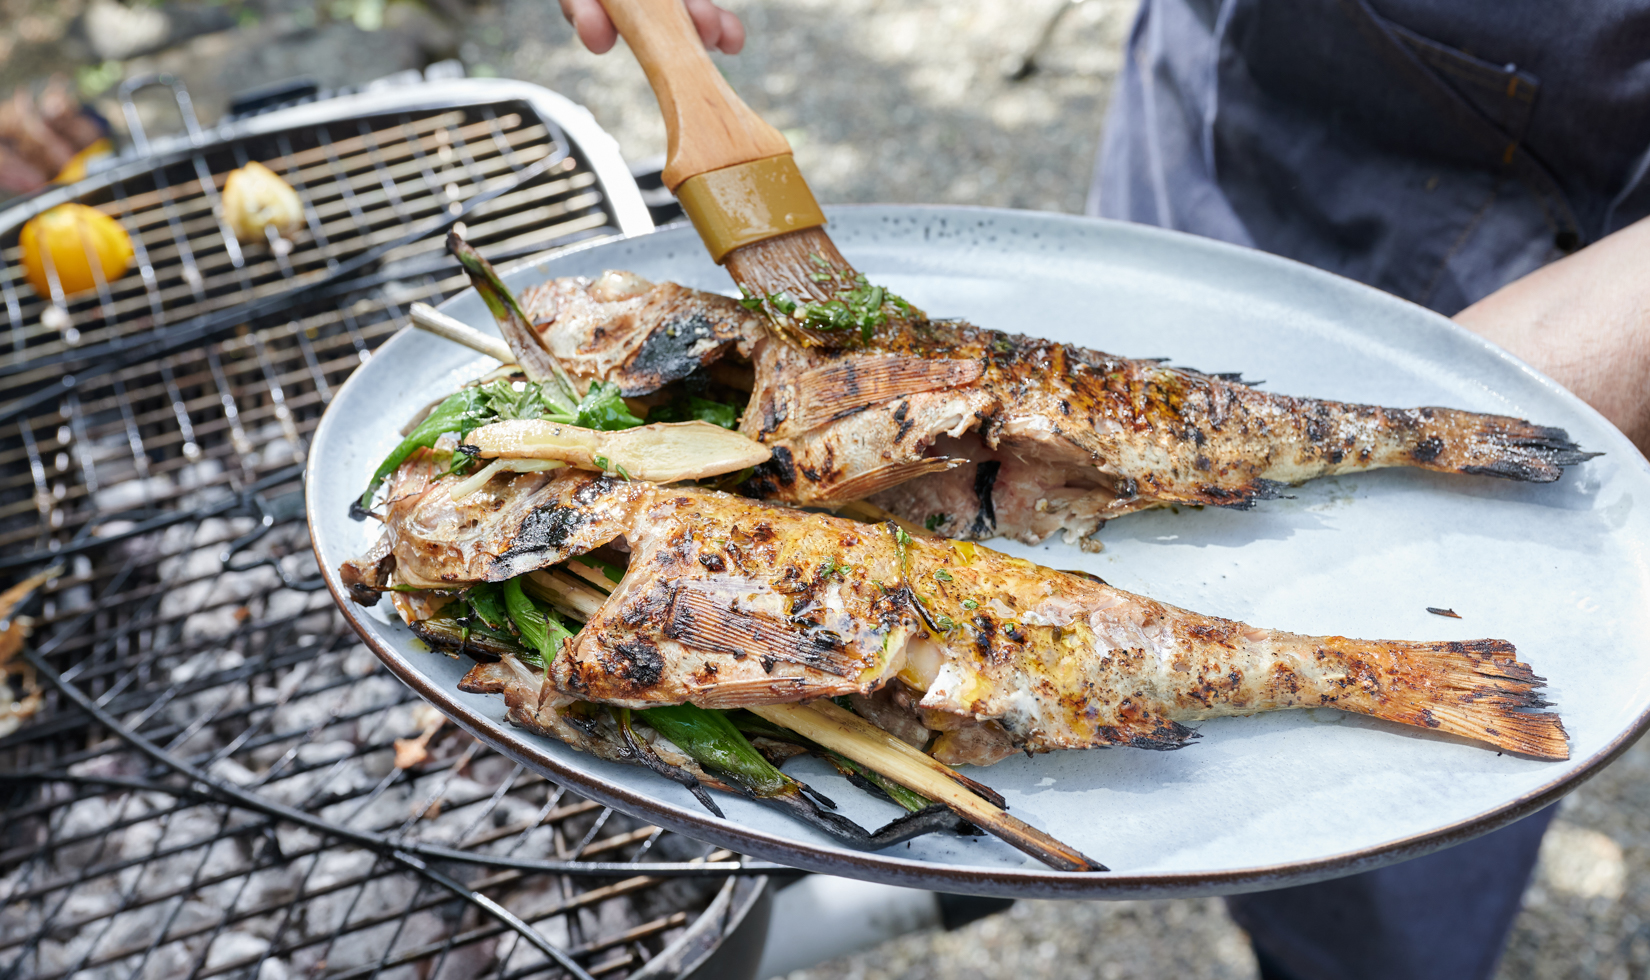 brushing two fish with marinade over the grill